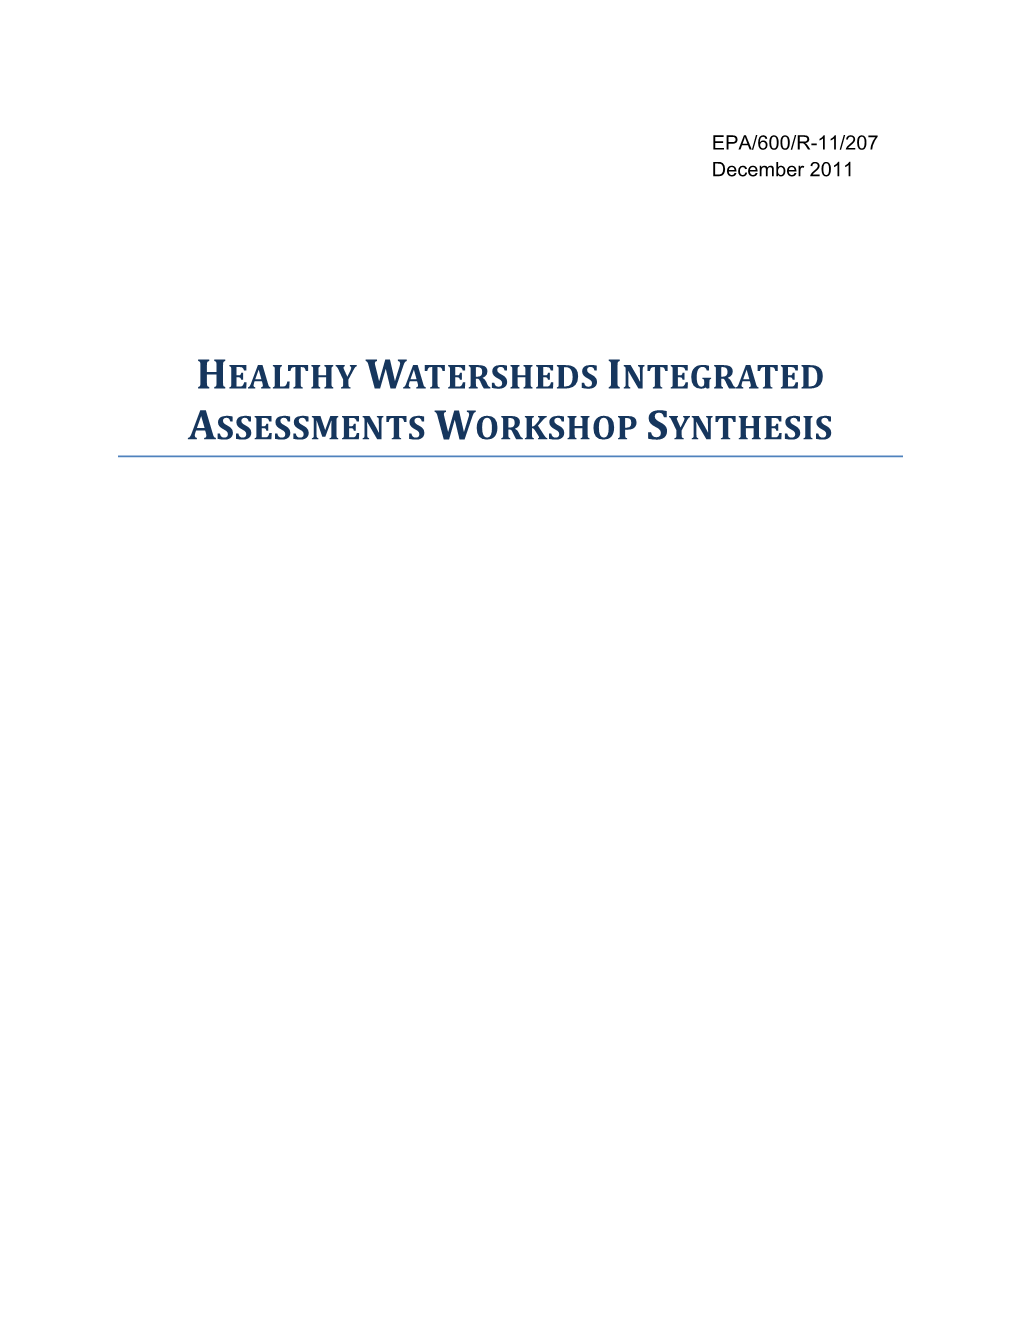 Healthy Watersheds Integrated Assessments Workshop Synthesis